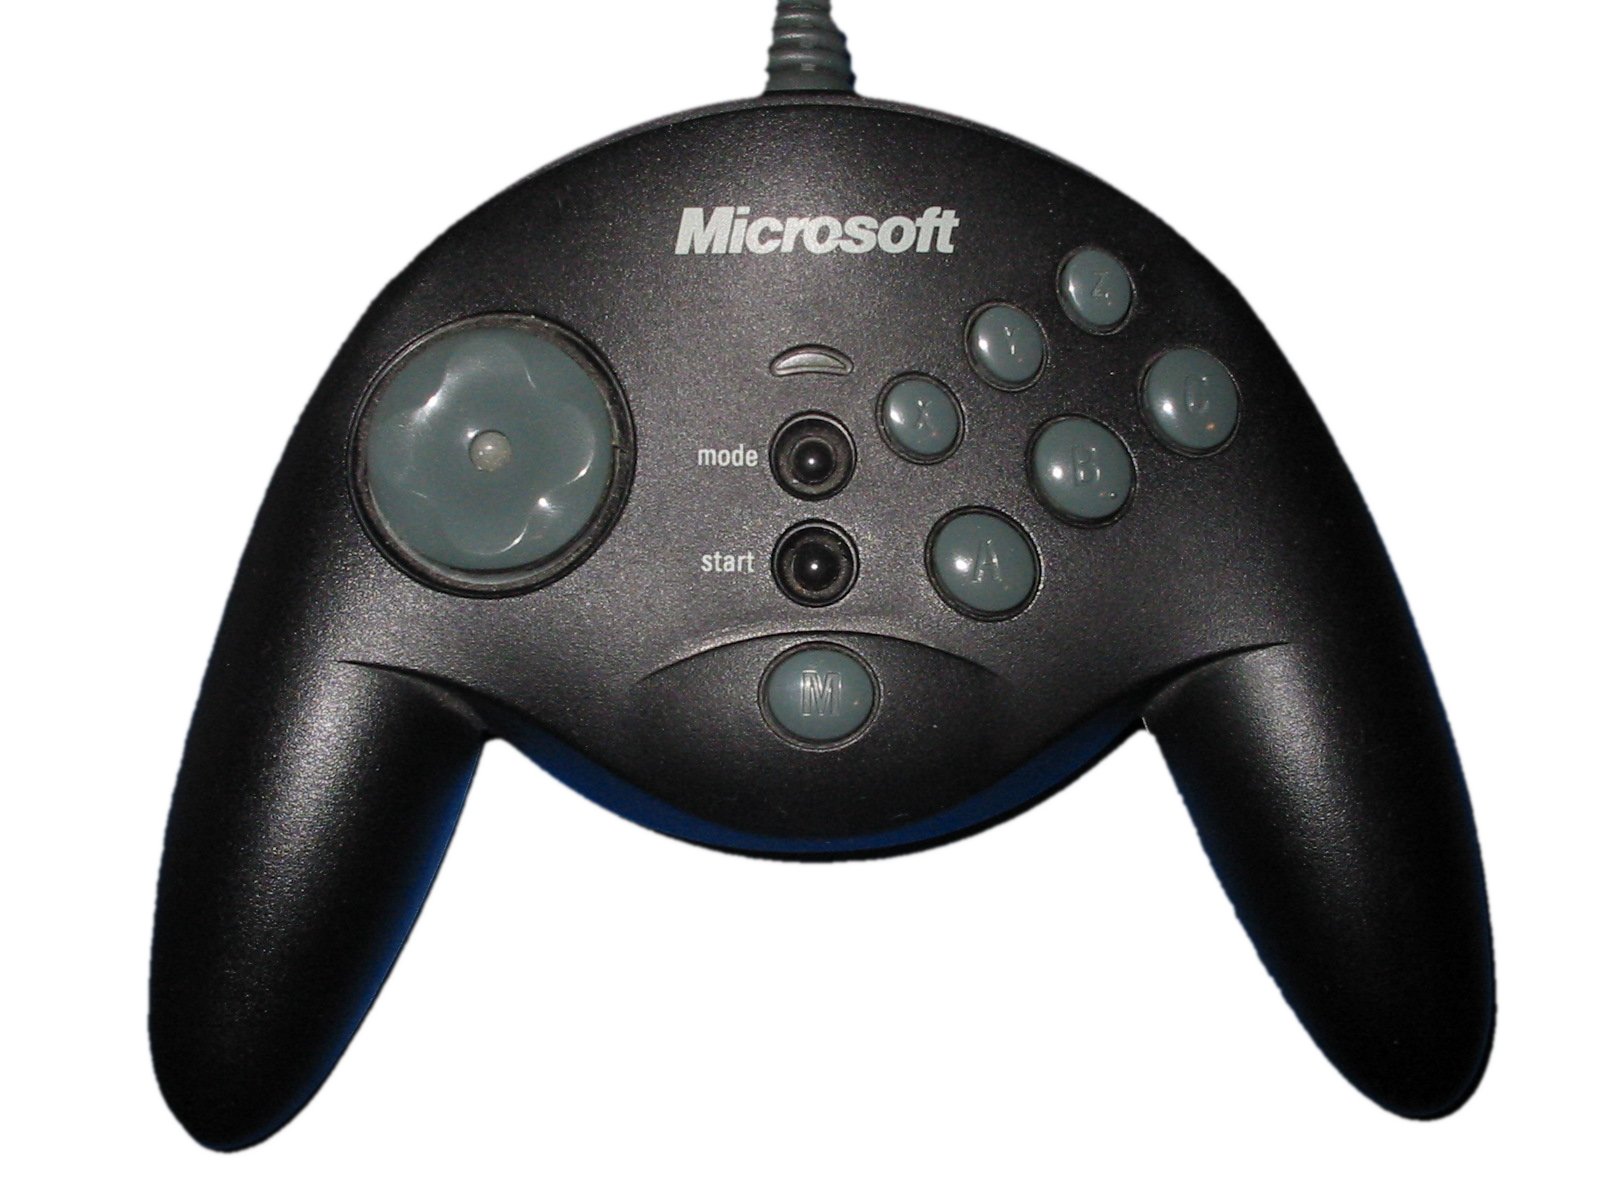 How To Get Microsoft Game Controller To Work On PC